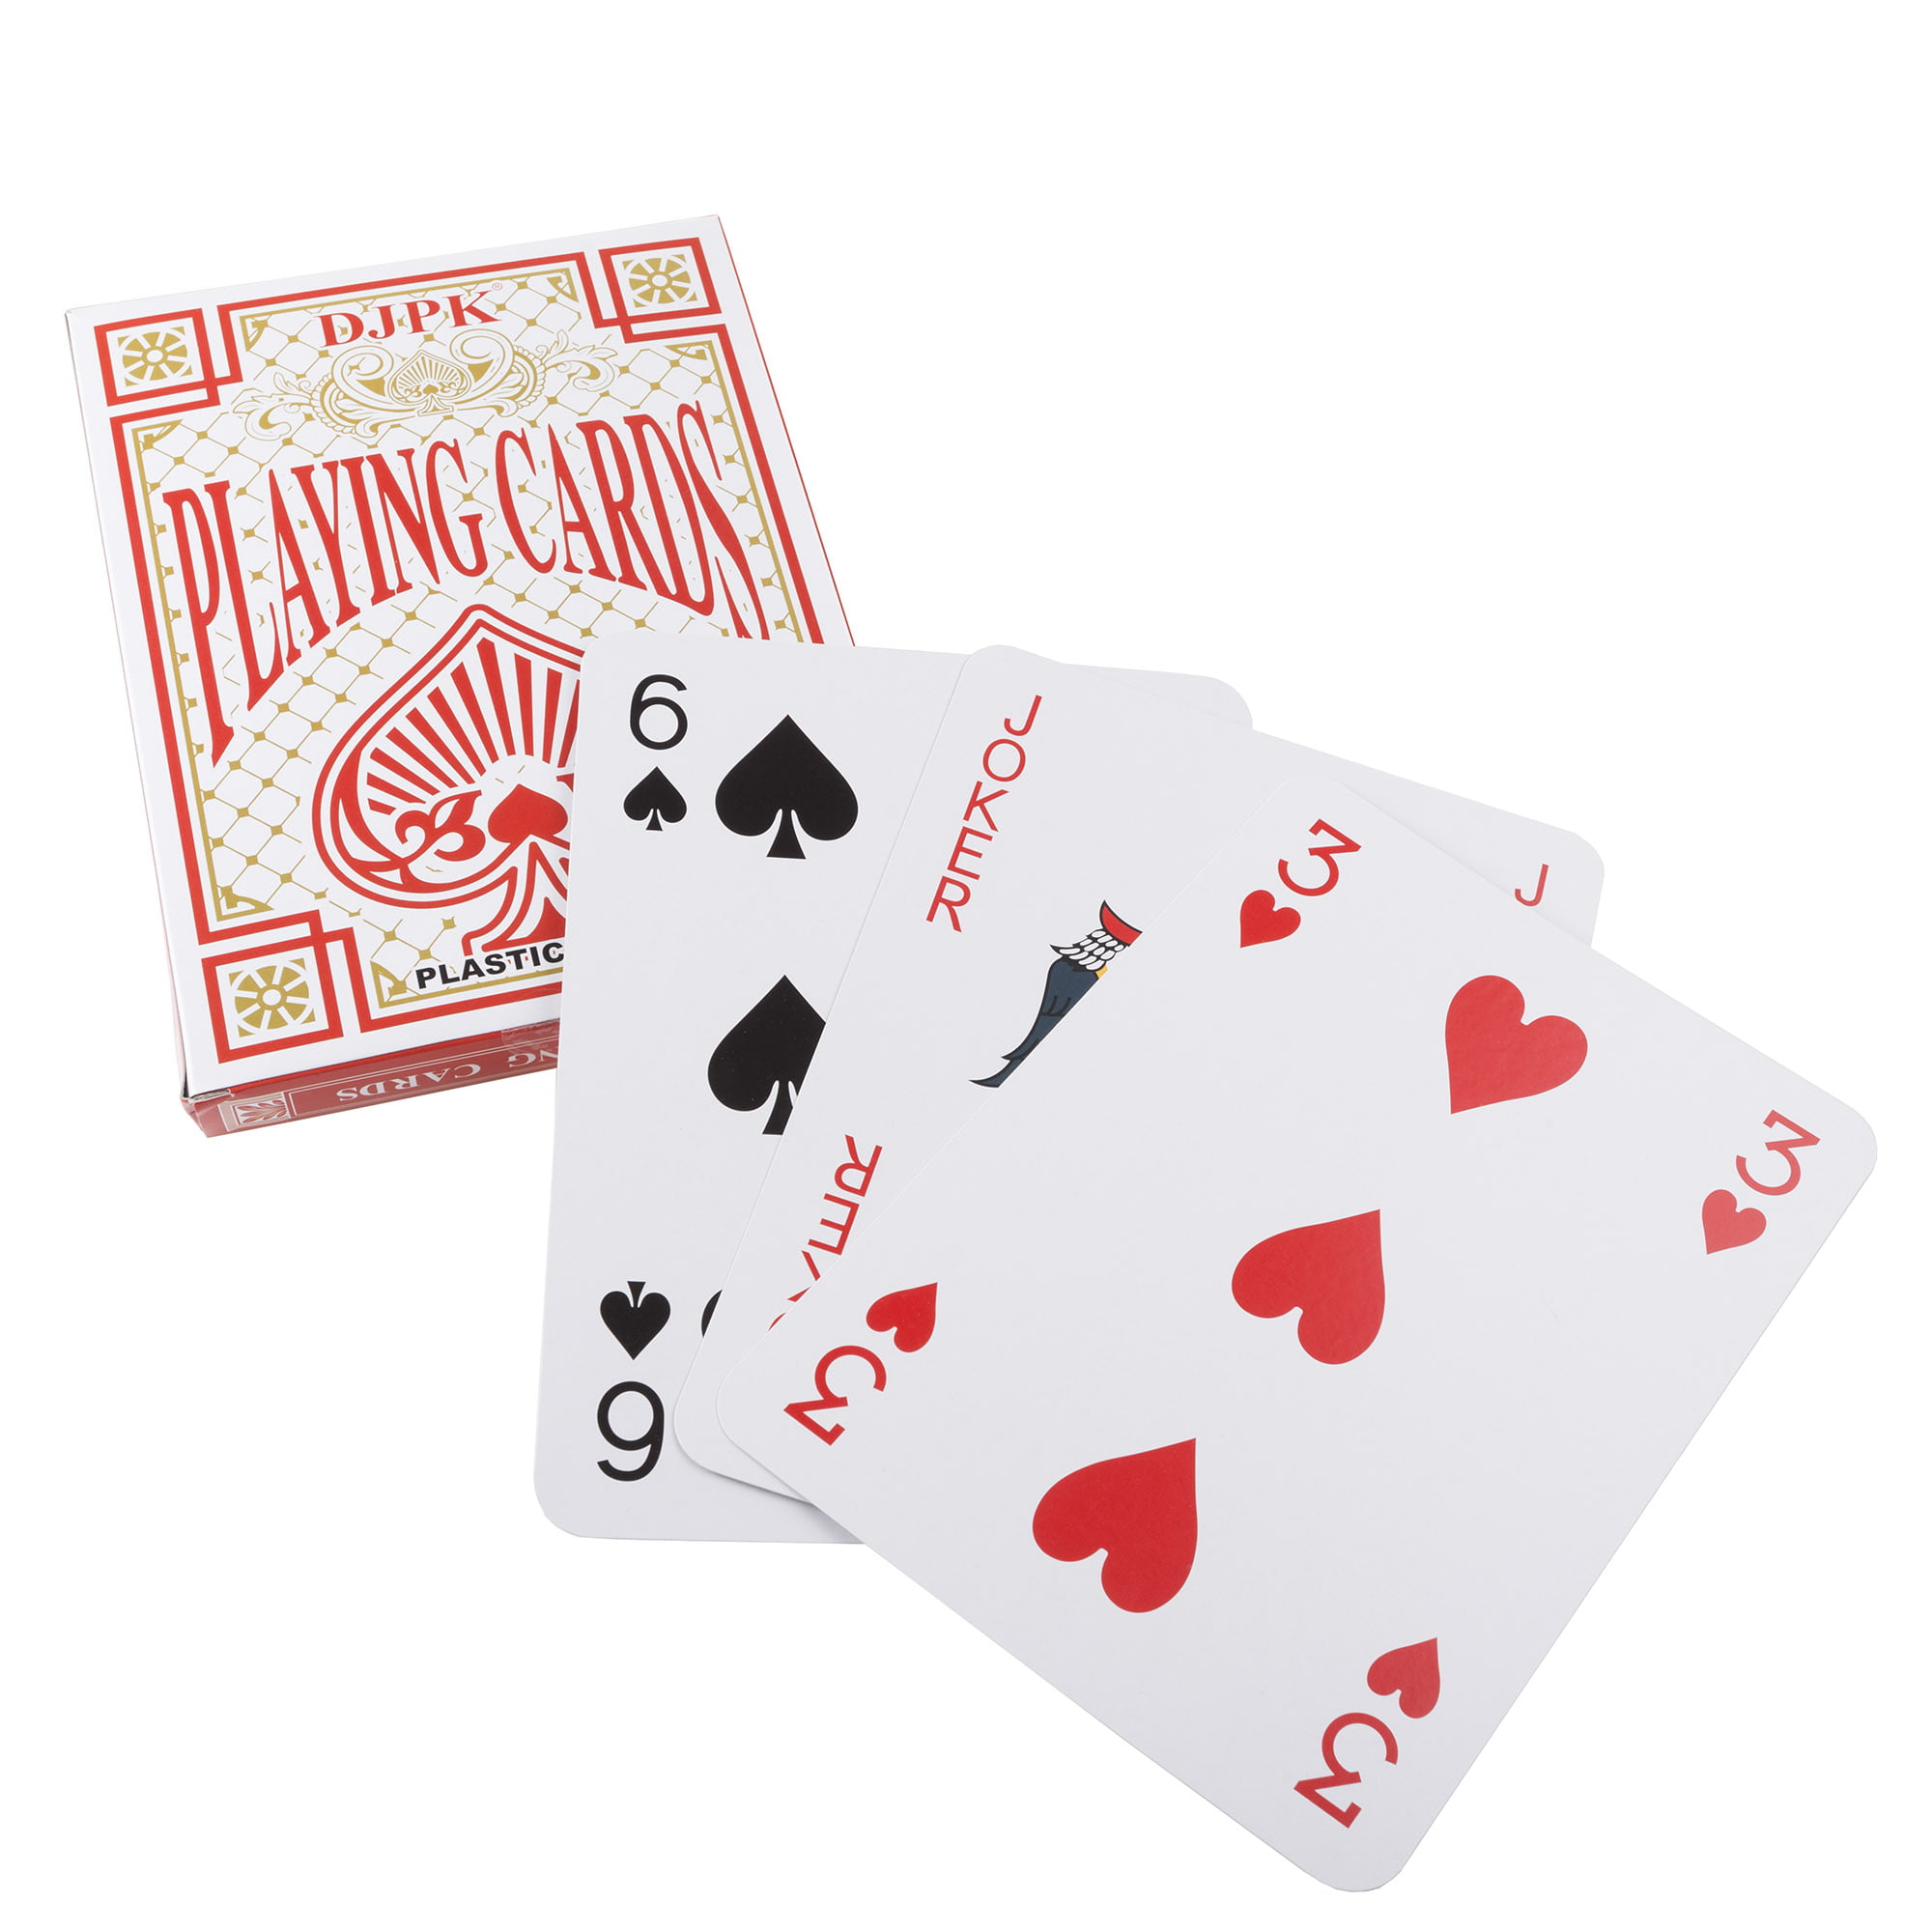 Details about   Jumbo Giant Playing Cards Deck Jumbo Outdoor Magic Big Party Game Cards 